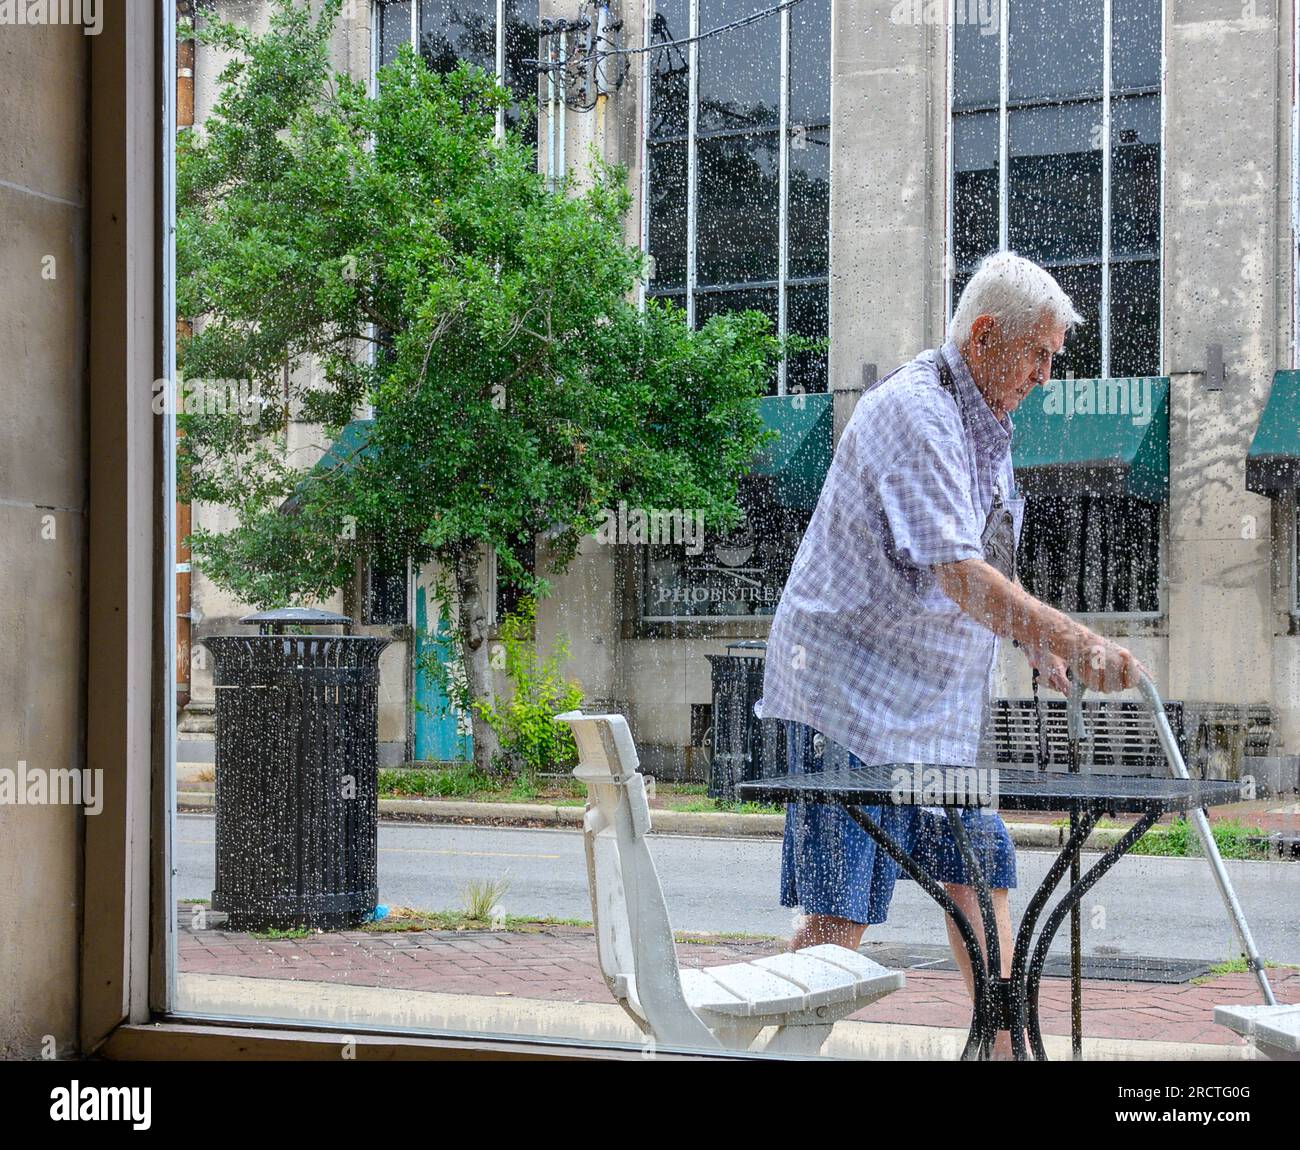 NEW ORLEANS, LA, USA - JULY 12, 2023: Male senior citizen using two canes to walk past window of cafe on Oak Street in Uptown Neighborhood Stock Photo